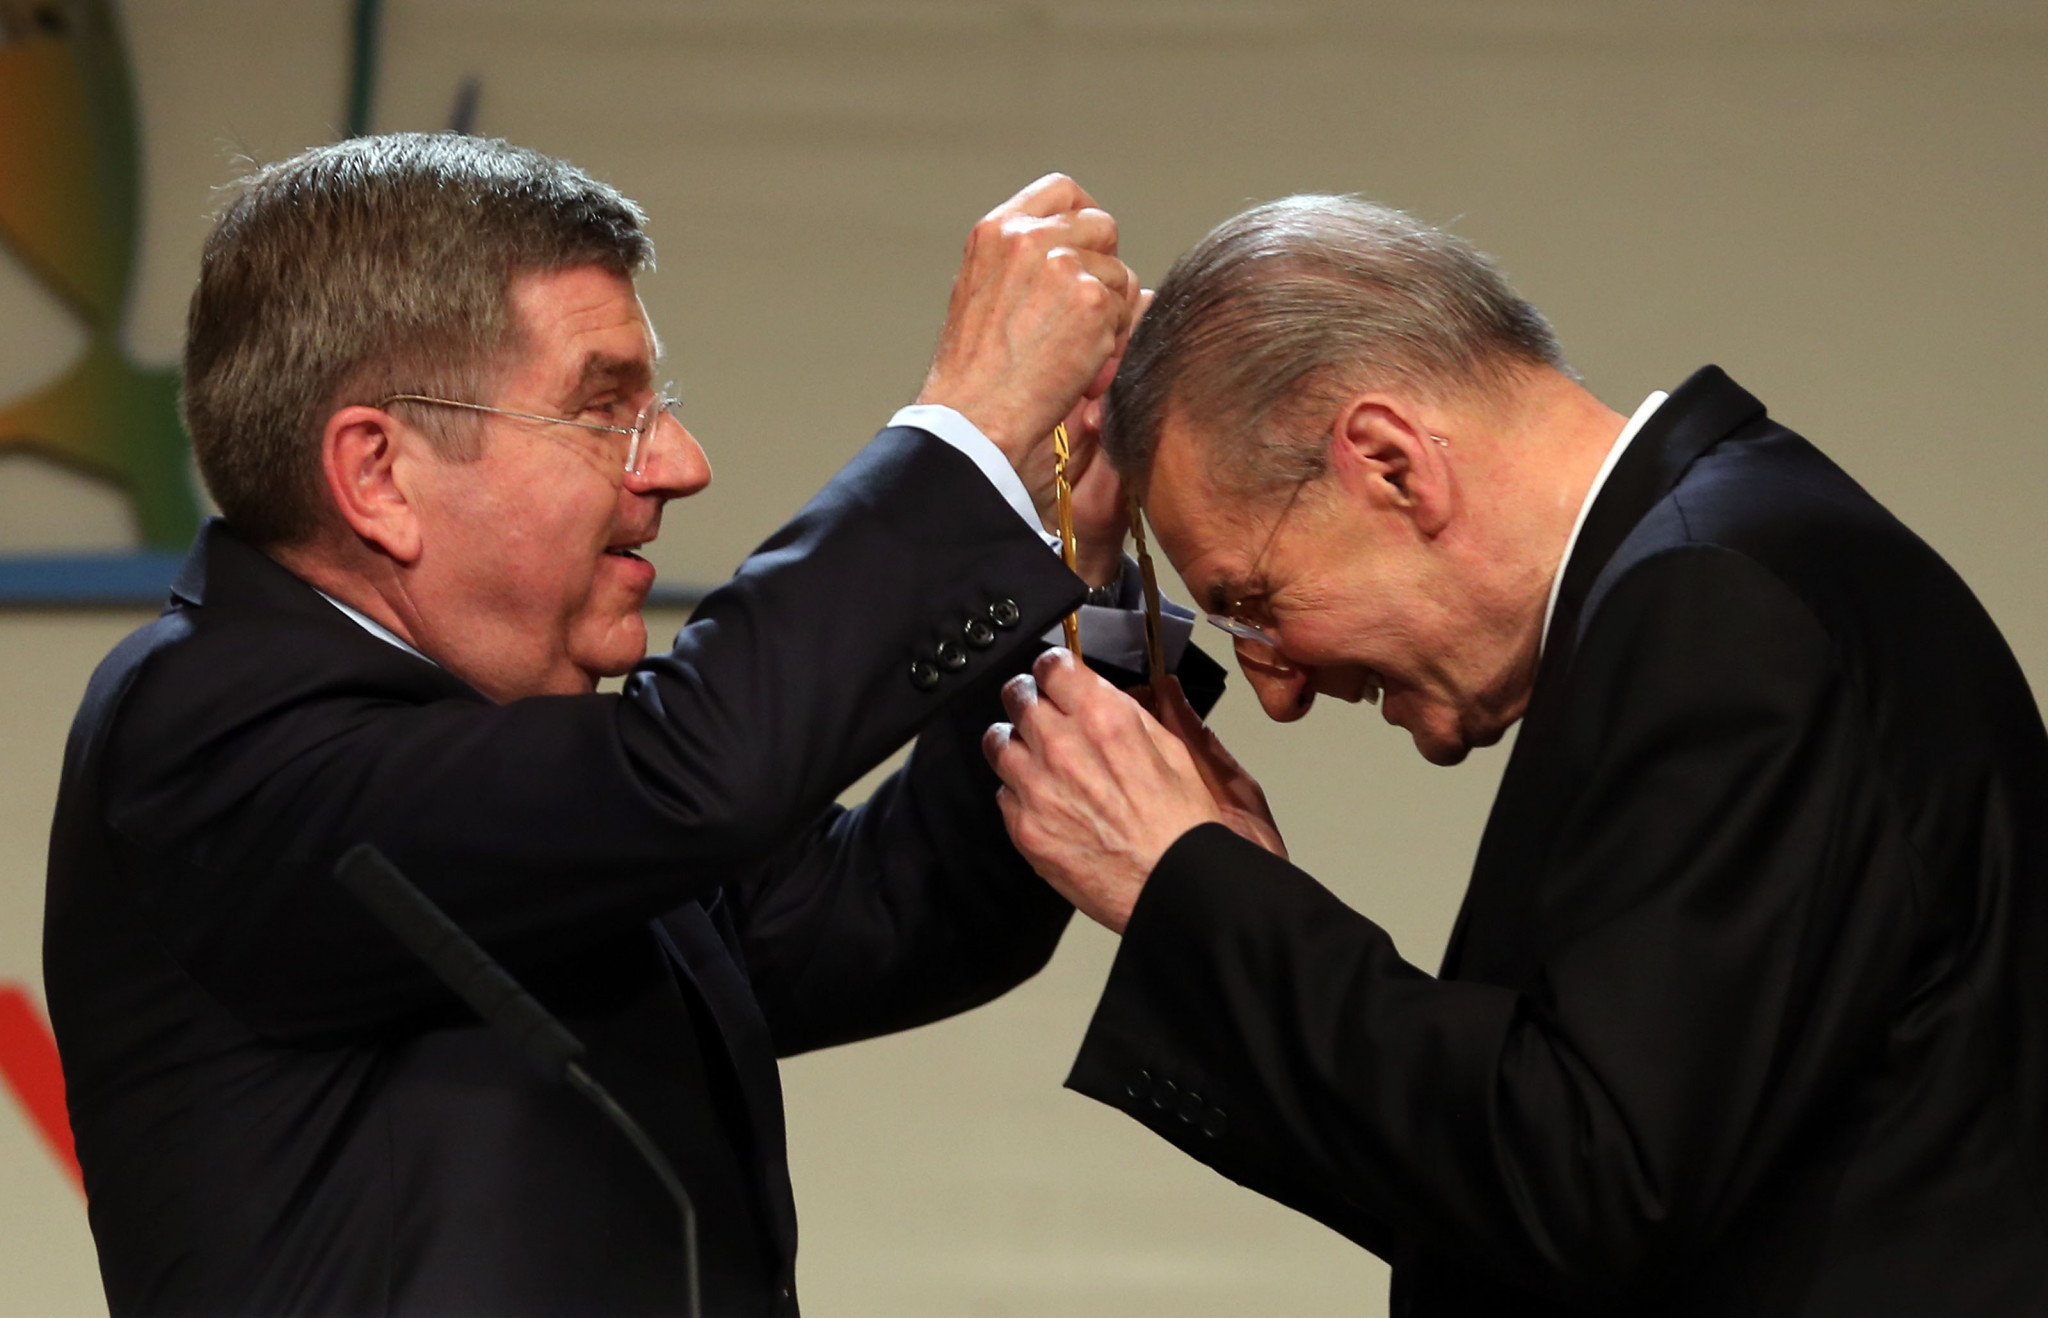 Jacques Rogge, right, was succeeded by Thomas Bach, left, as IOC President in 2013 ©Getty Images